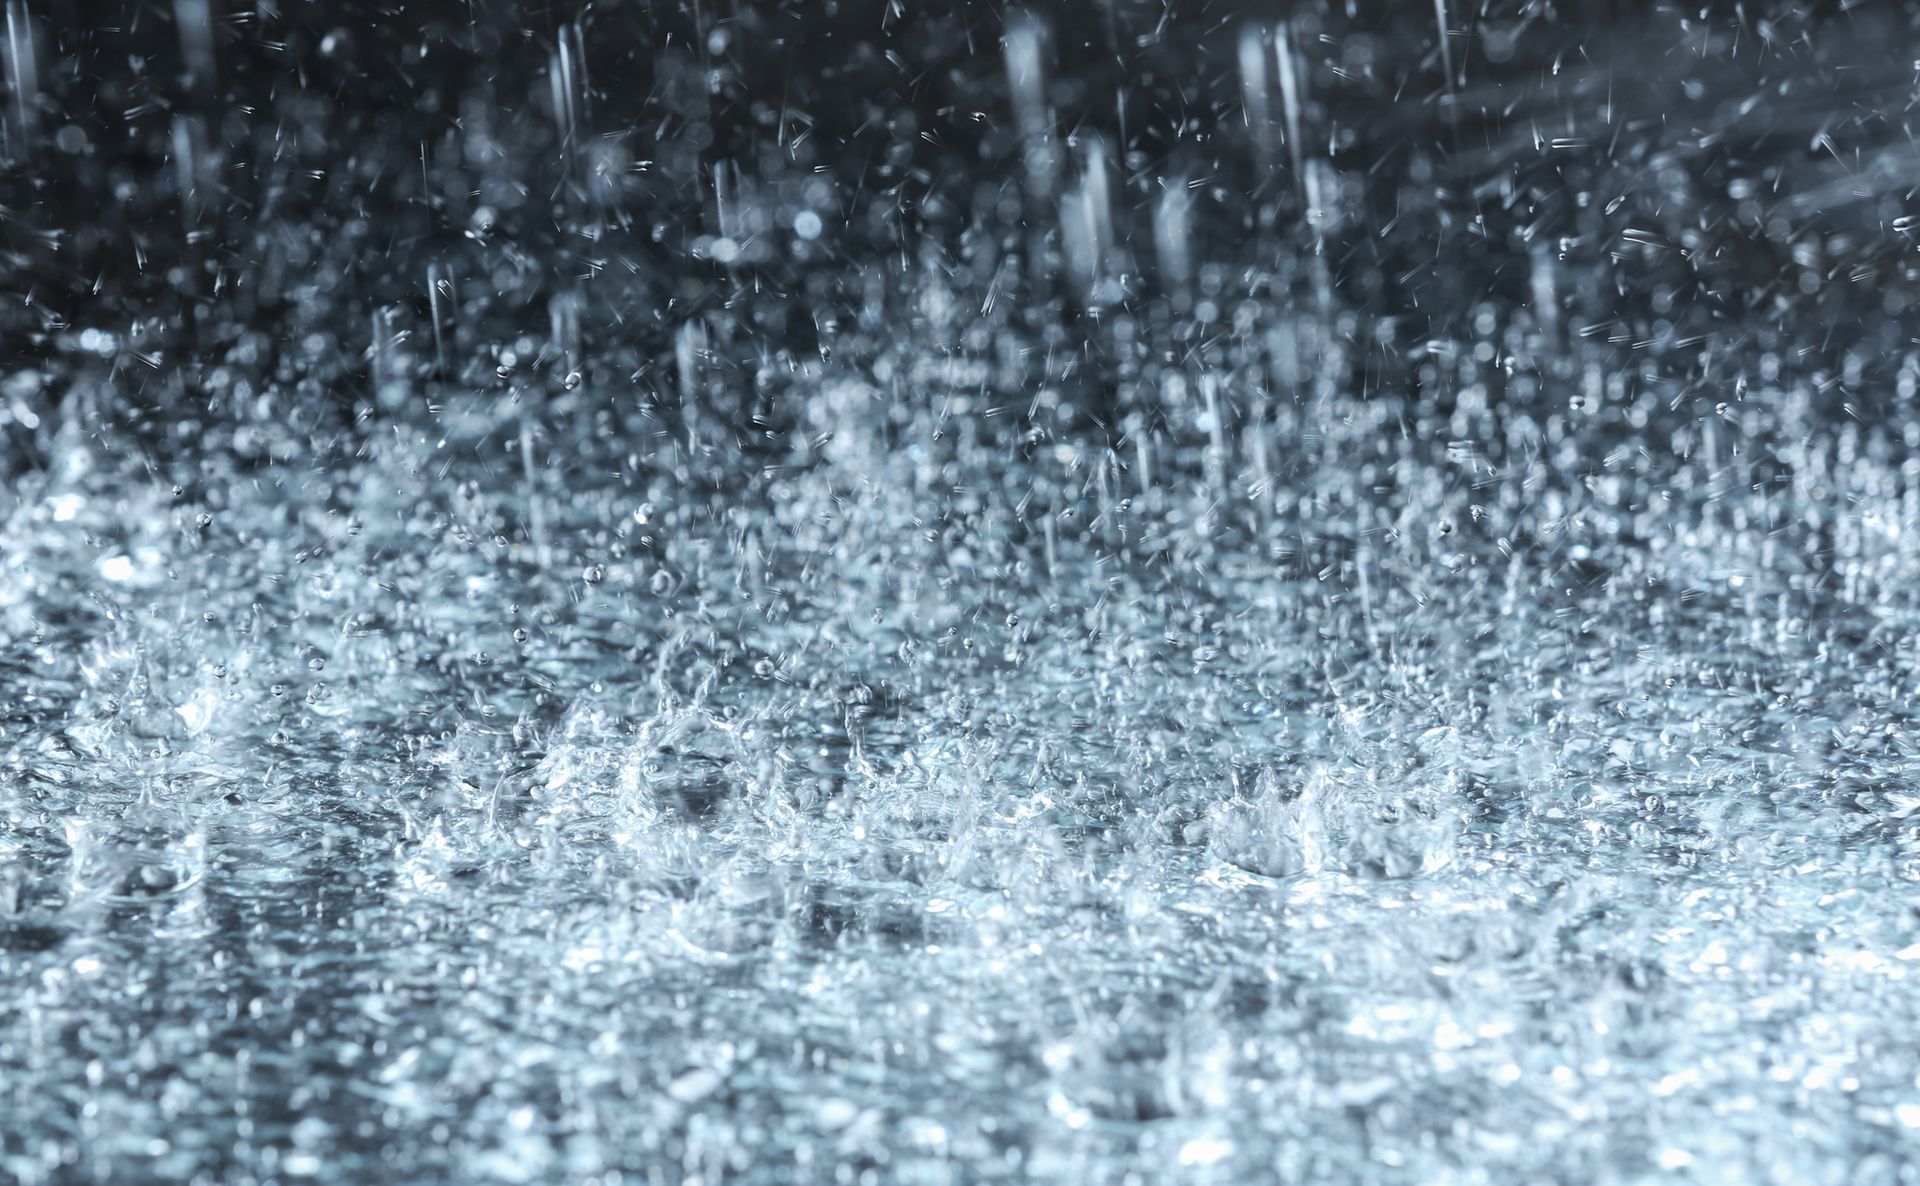 A close up of rain falling on a black surface.